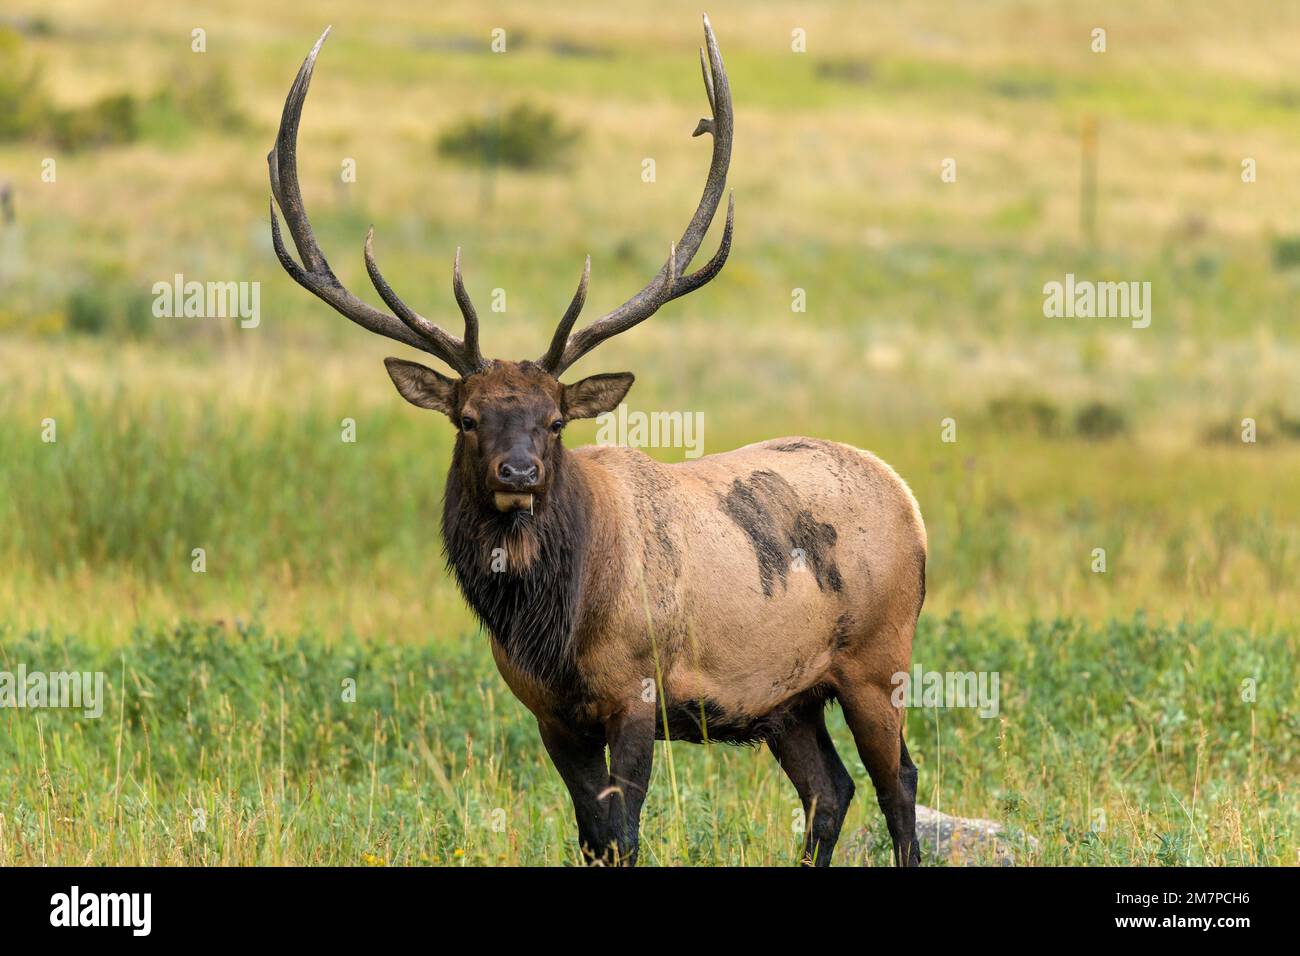 Bull Elk - Close-up view of a strong mature bull elk standing and grazing in a mountain meadow on a late Summer evening. Rocky Mountain National Park. Stock Photo